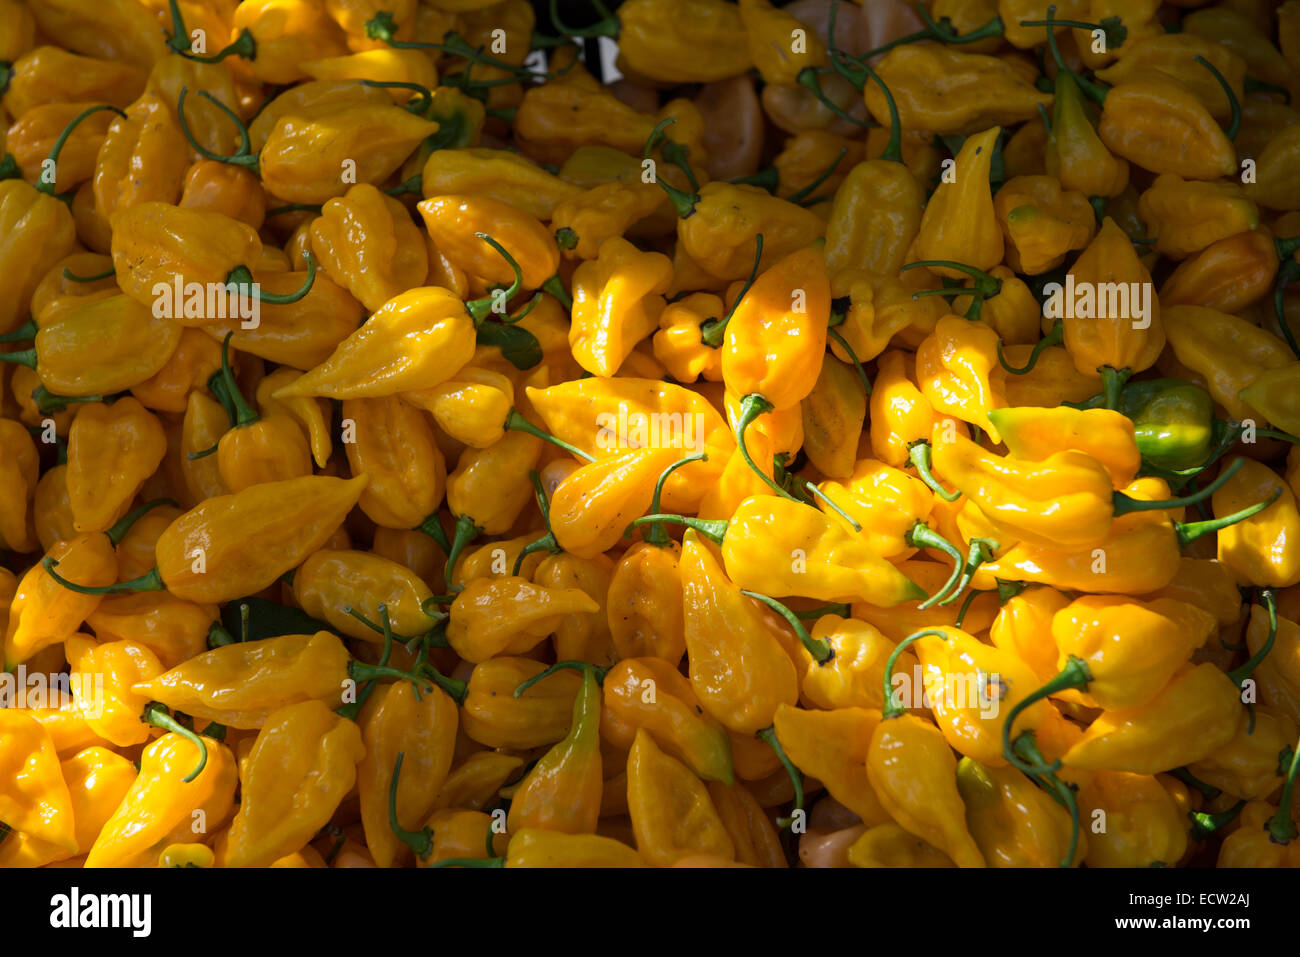 Different kinds of vegetables in a street market in Union Square, Manhattan, New York City, NY, USA. Stock Photo